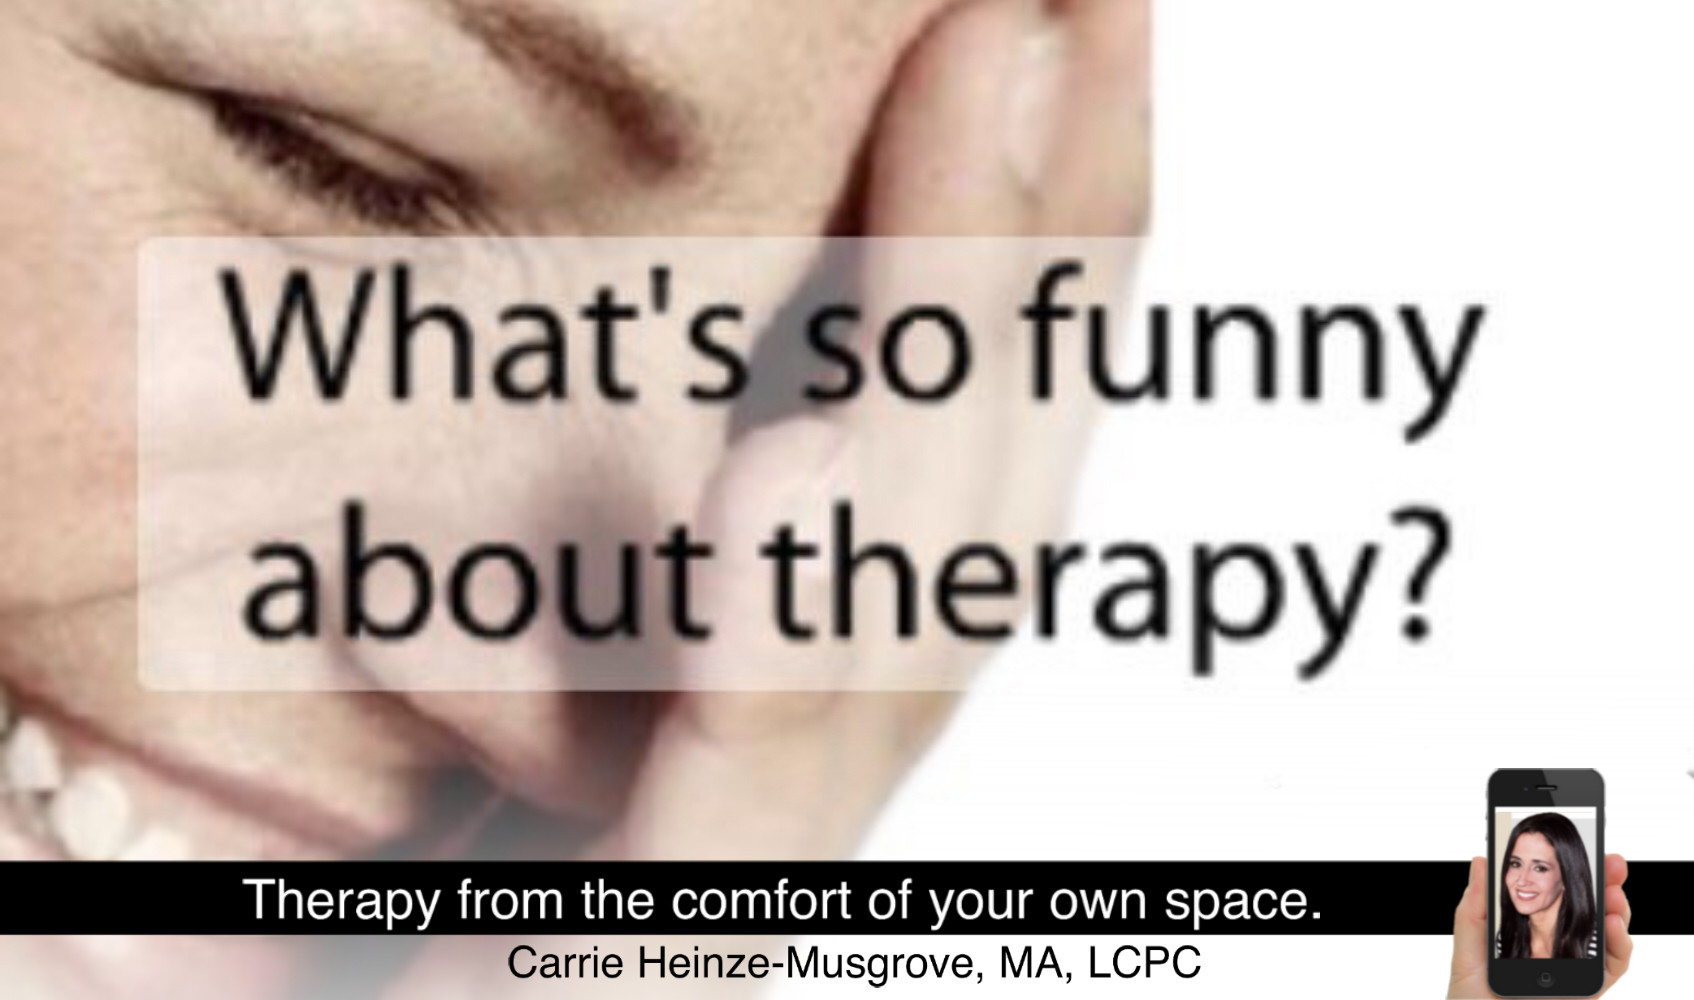 What’s so funny about therapy?